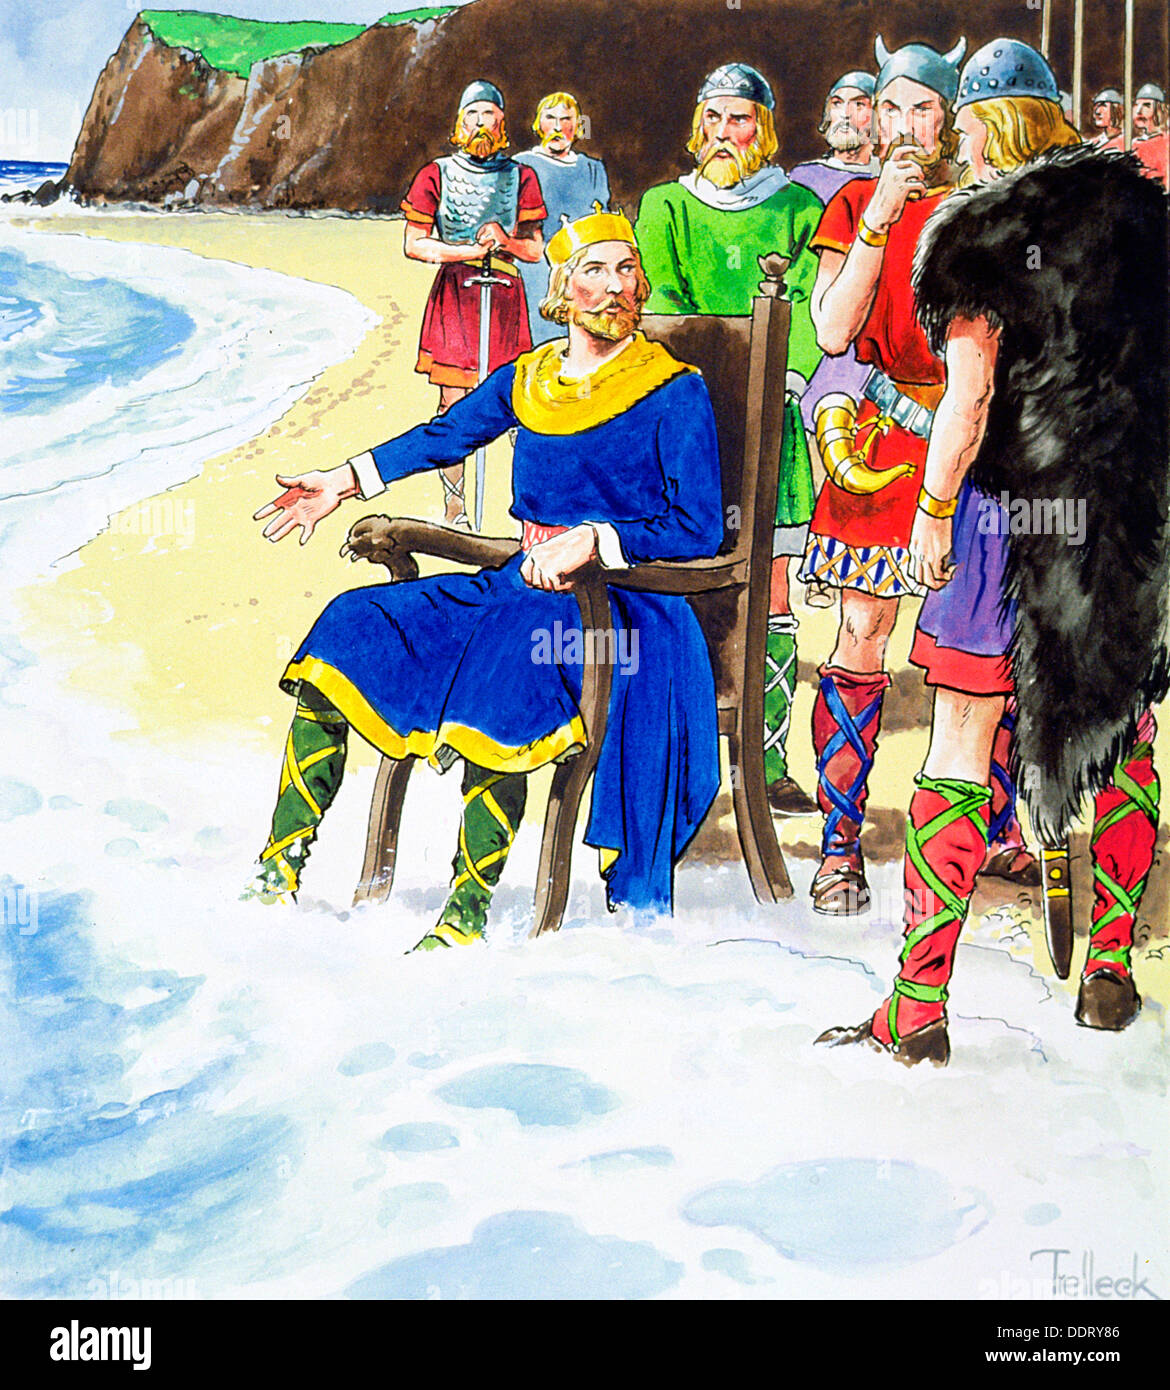 King Canute